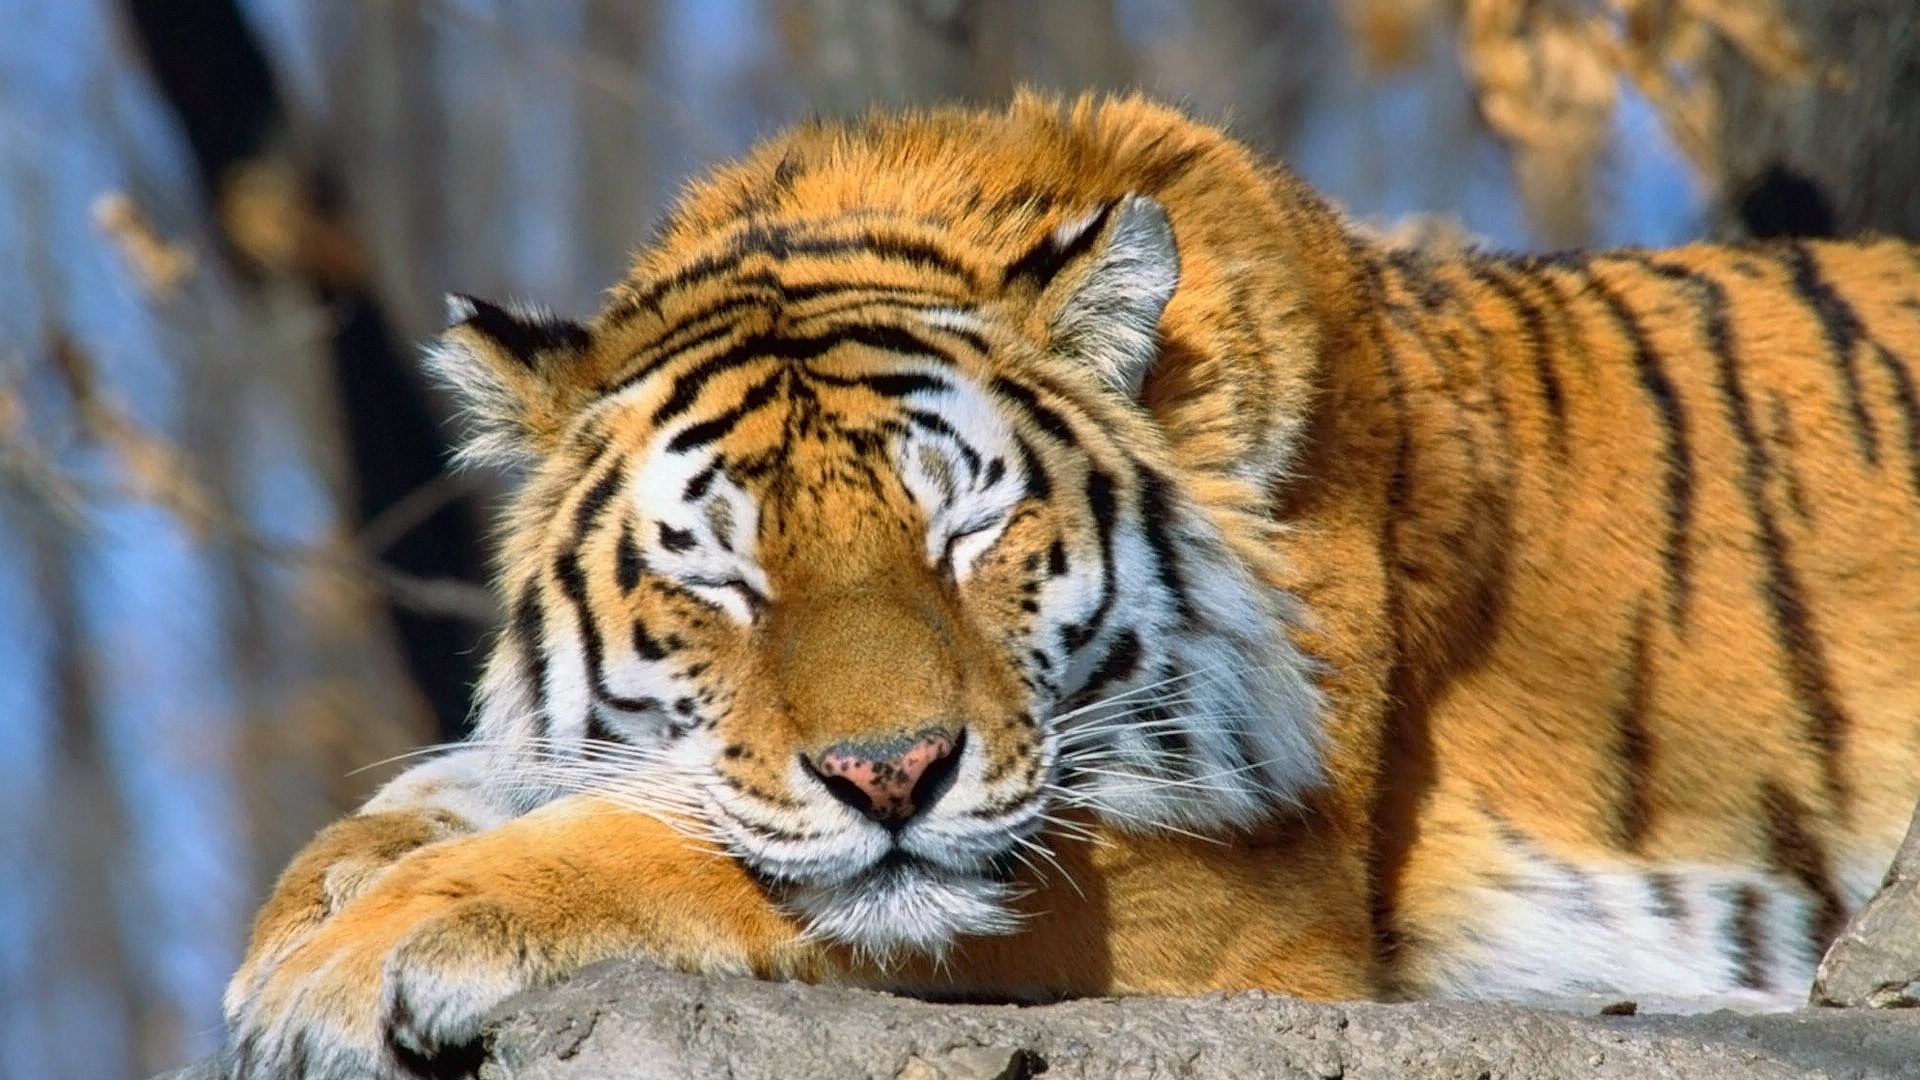 Sleeping Tiger 1920x1080 Wallpapers,Tiger 1920x1080 Wallpapers